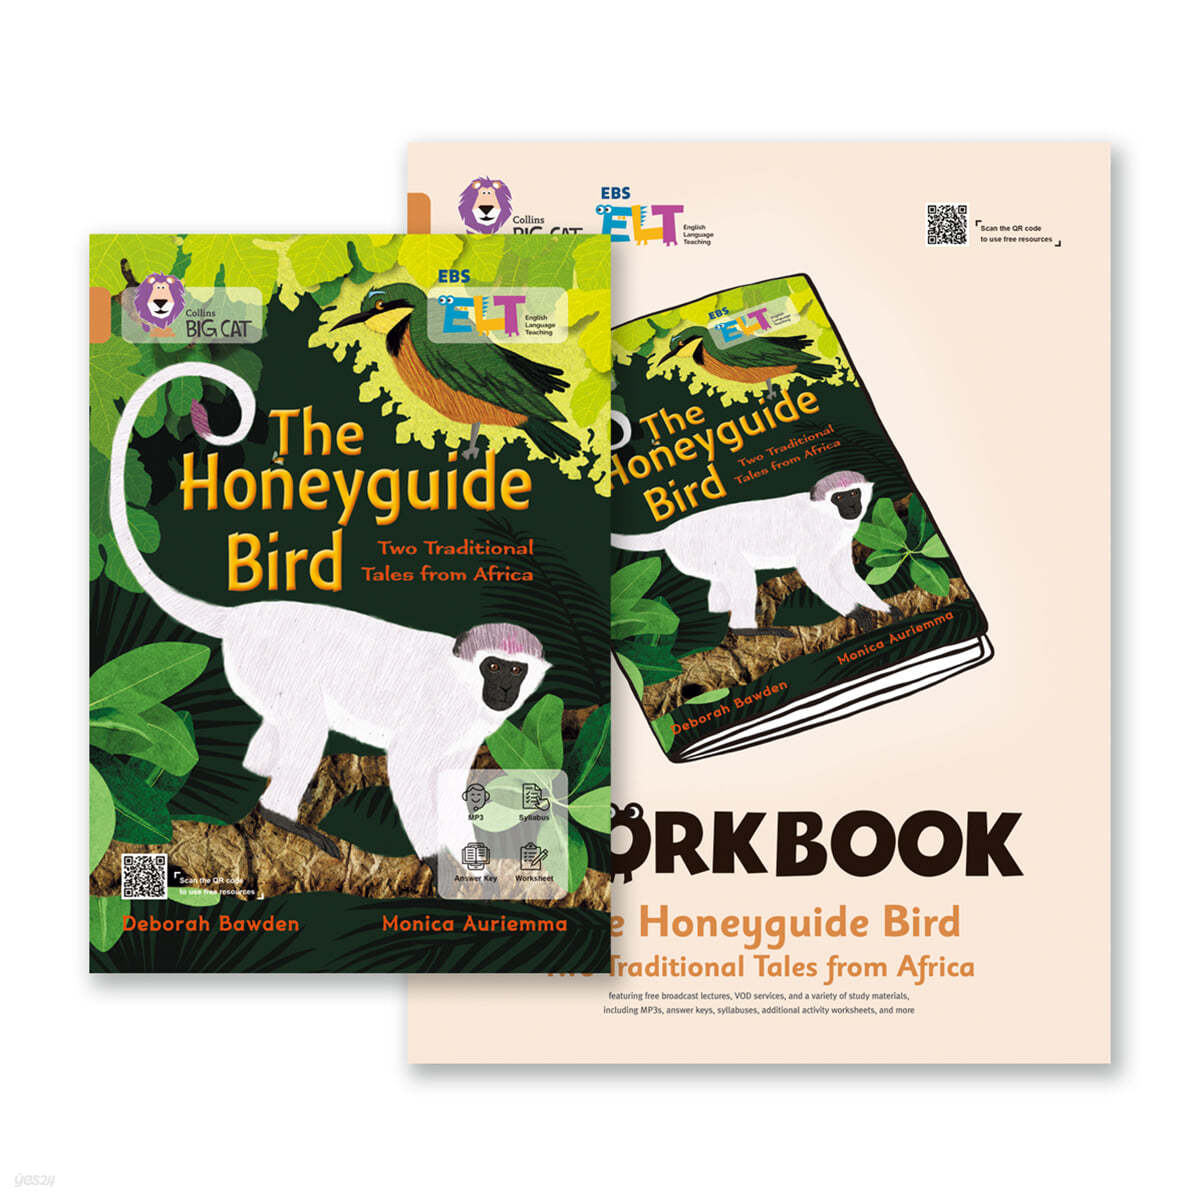 EBS ELT - Big Cat (Band12) THE HONEYGUIDE BIRD: TWO TRADITIONAL TALES FROM AFRICA